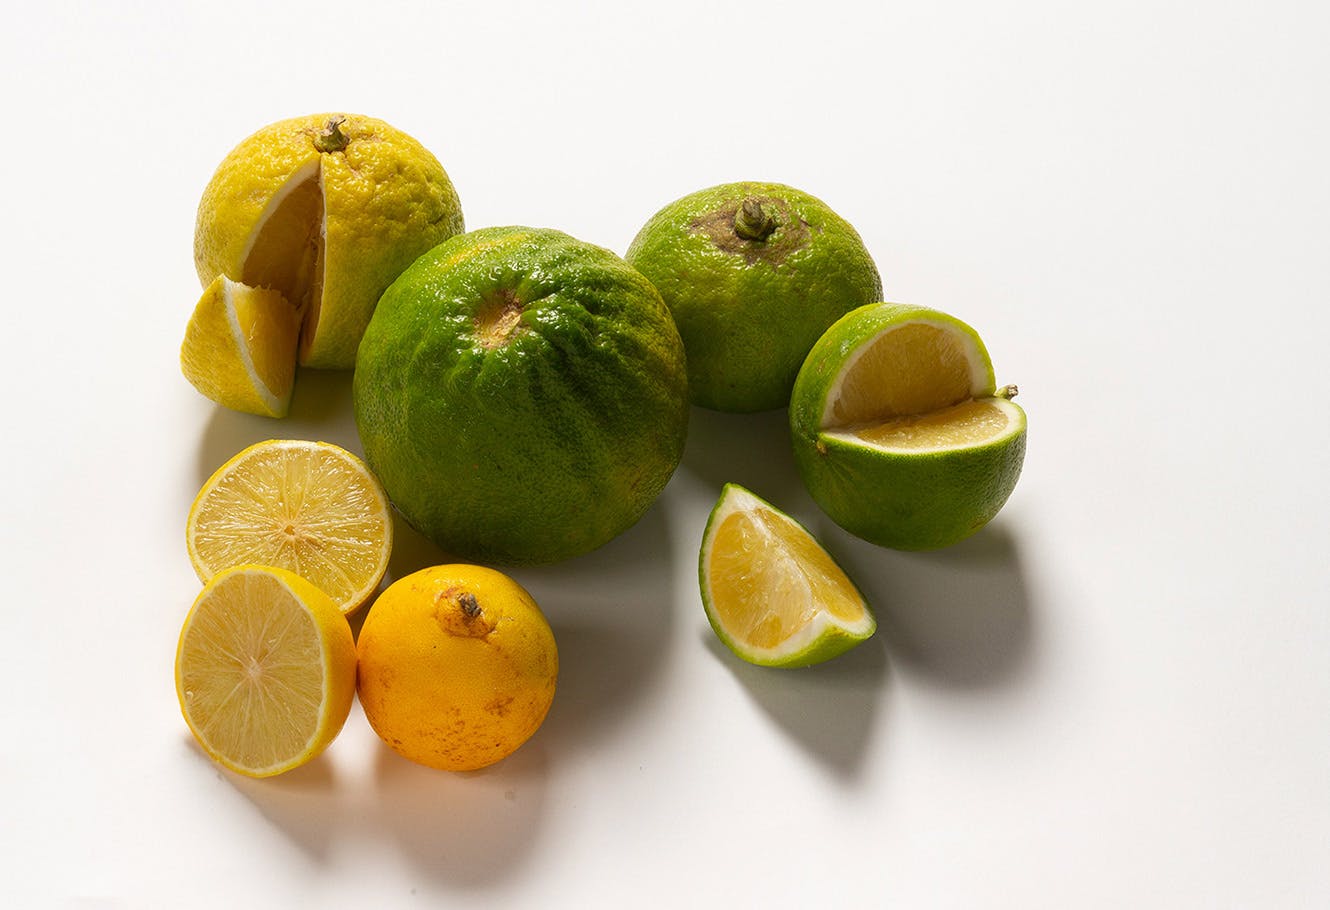 Whole and cut fruits of yellow and green bergamots.